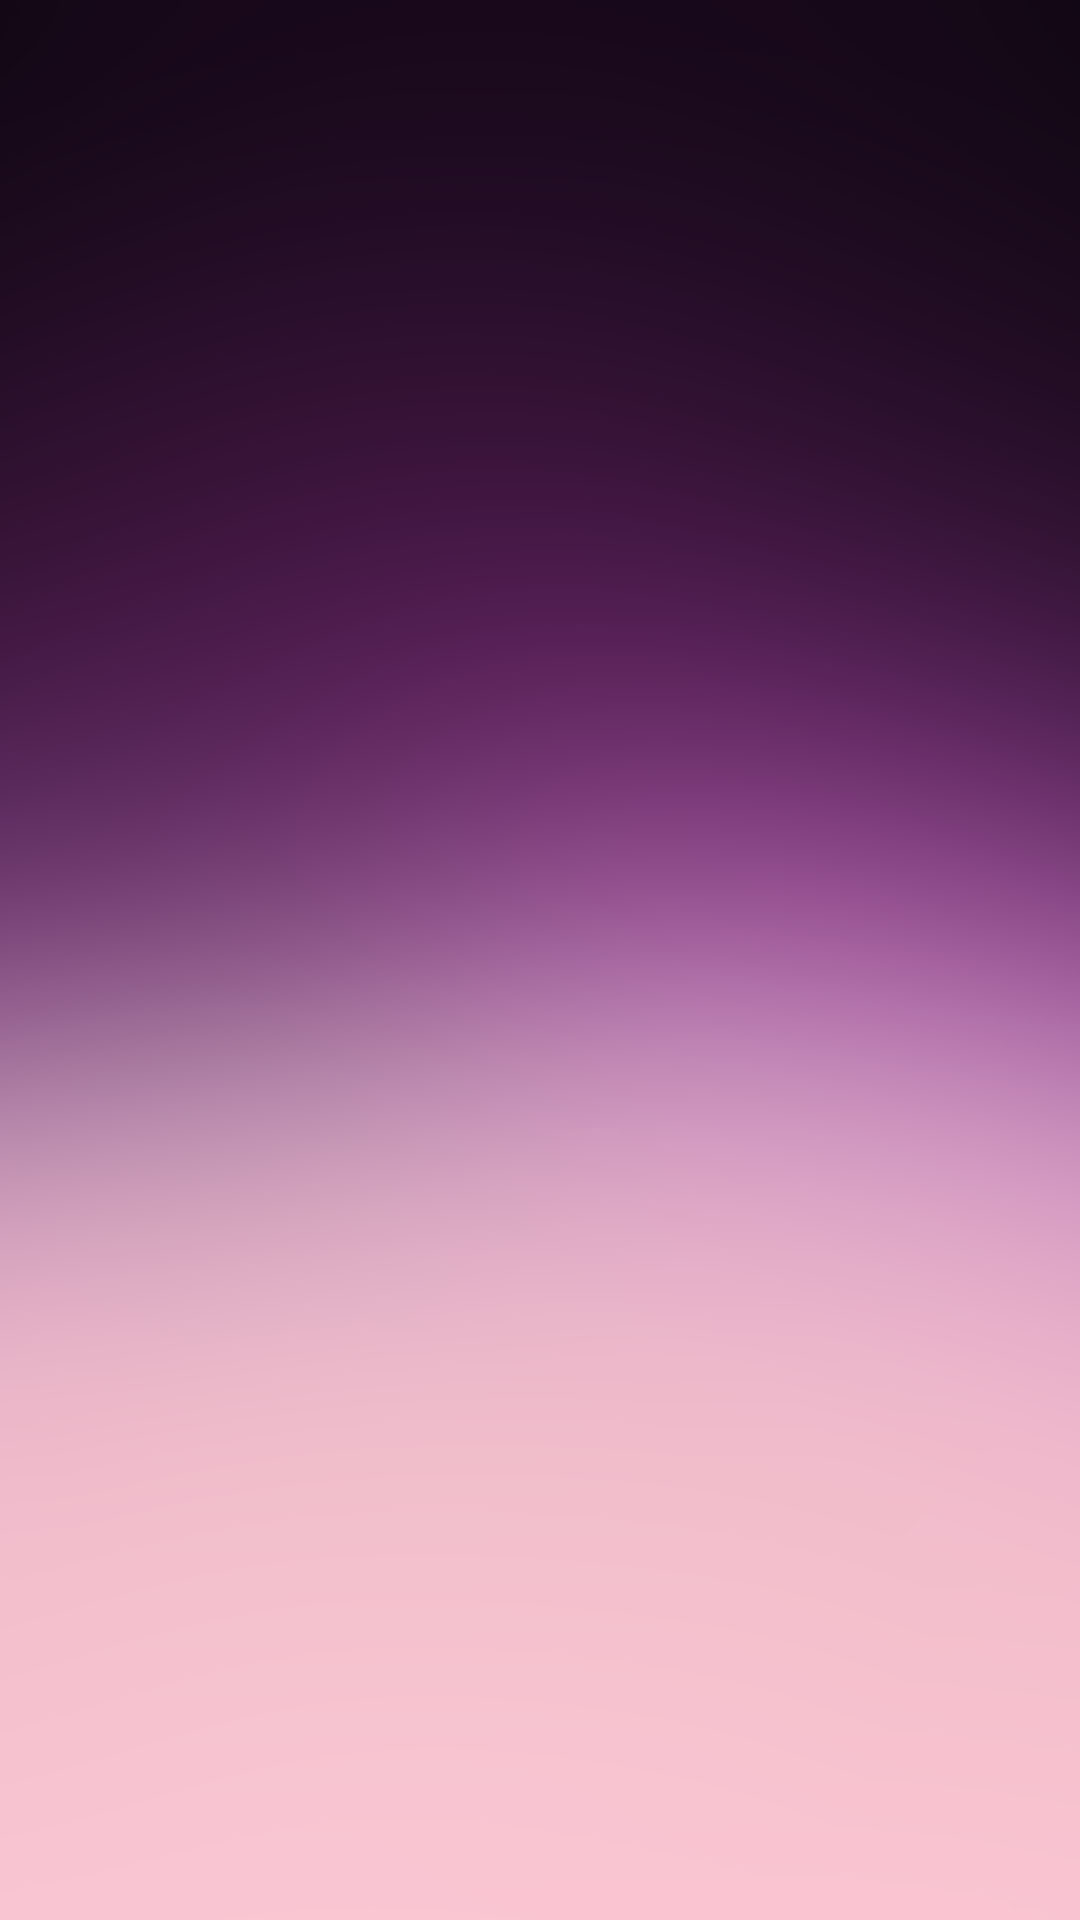 1080x1920 Simple Wallpaper Purple Pink Gradient Simple Android Wallpaper